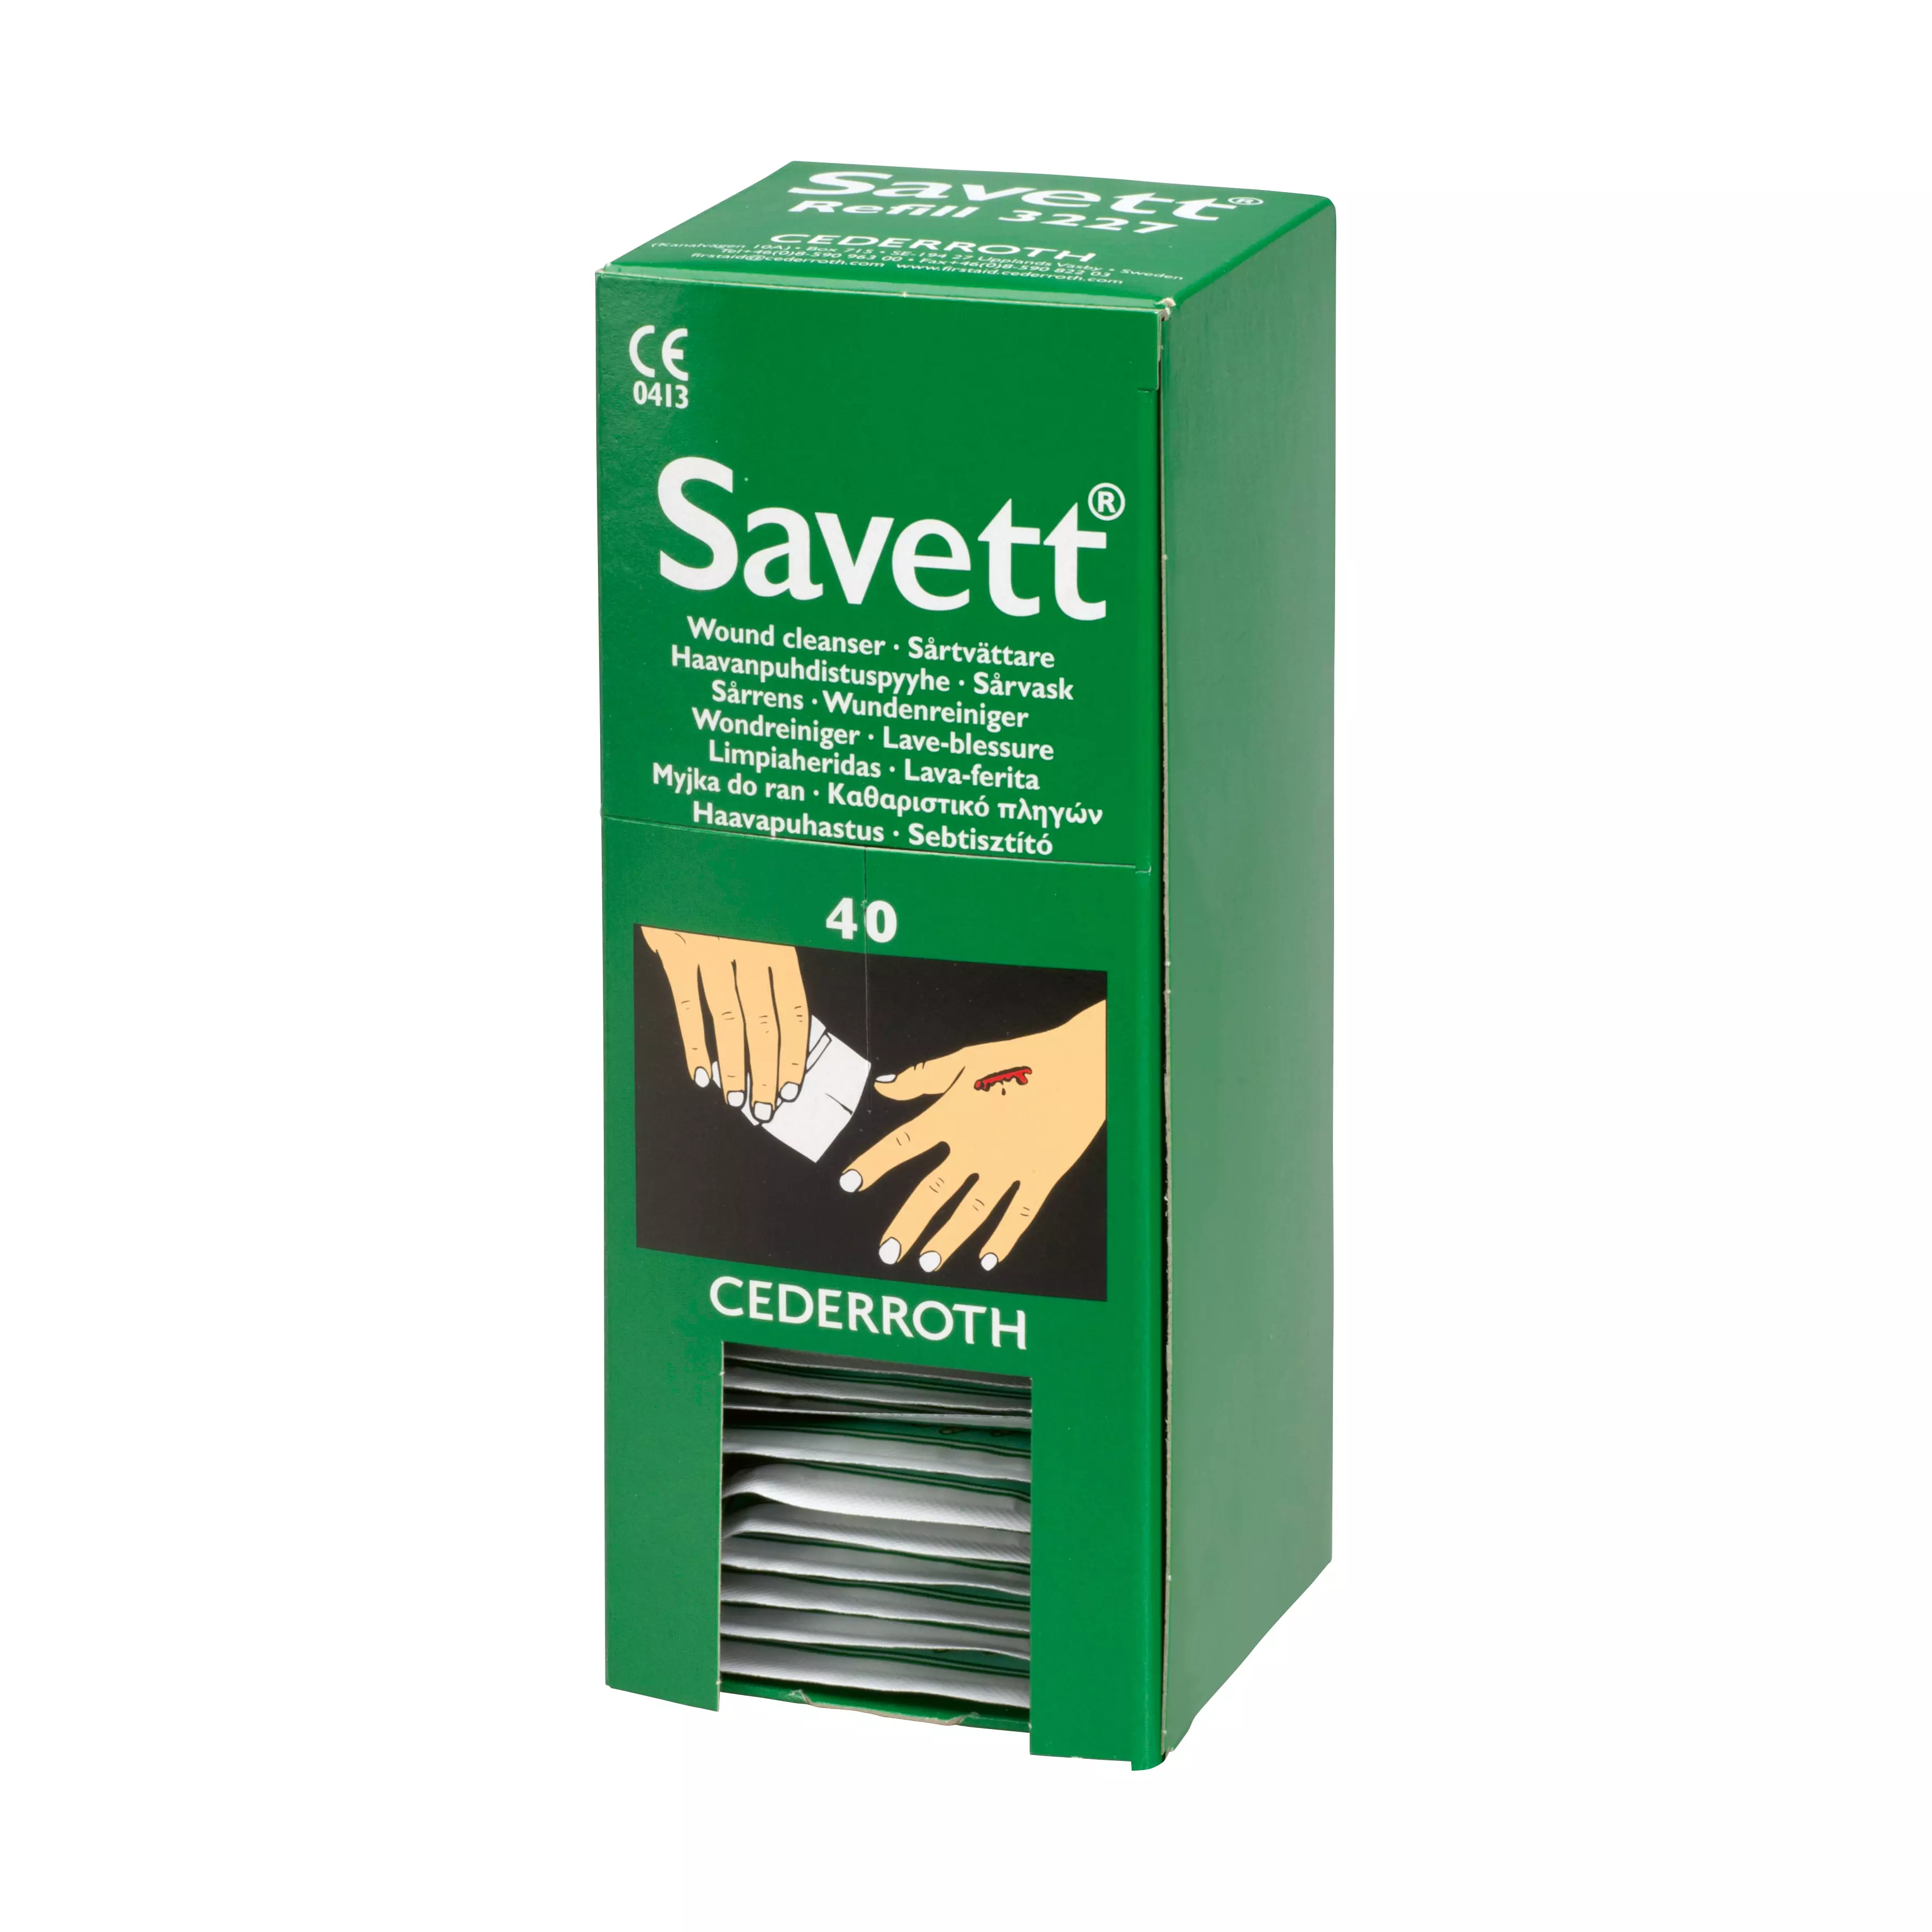 Savett® wound cleansing wipes